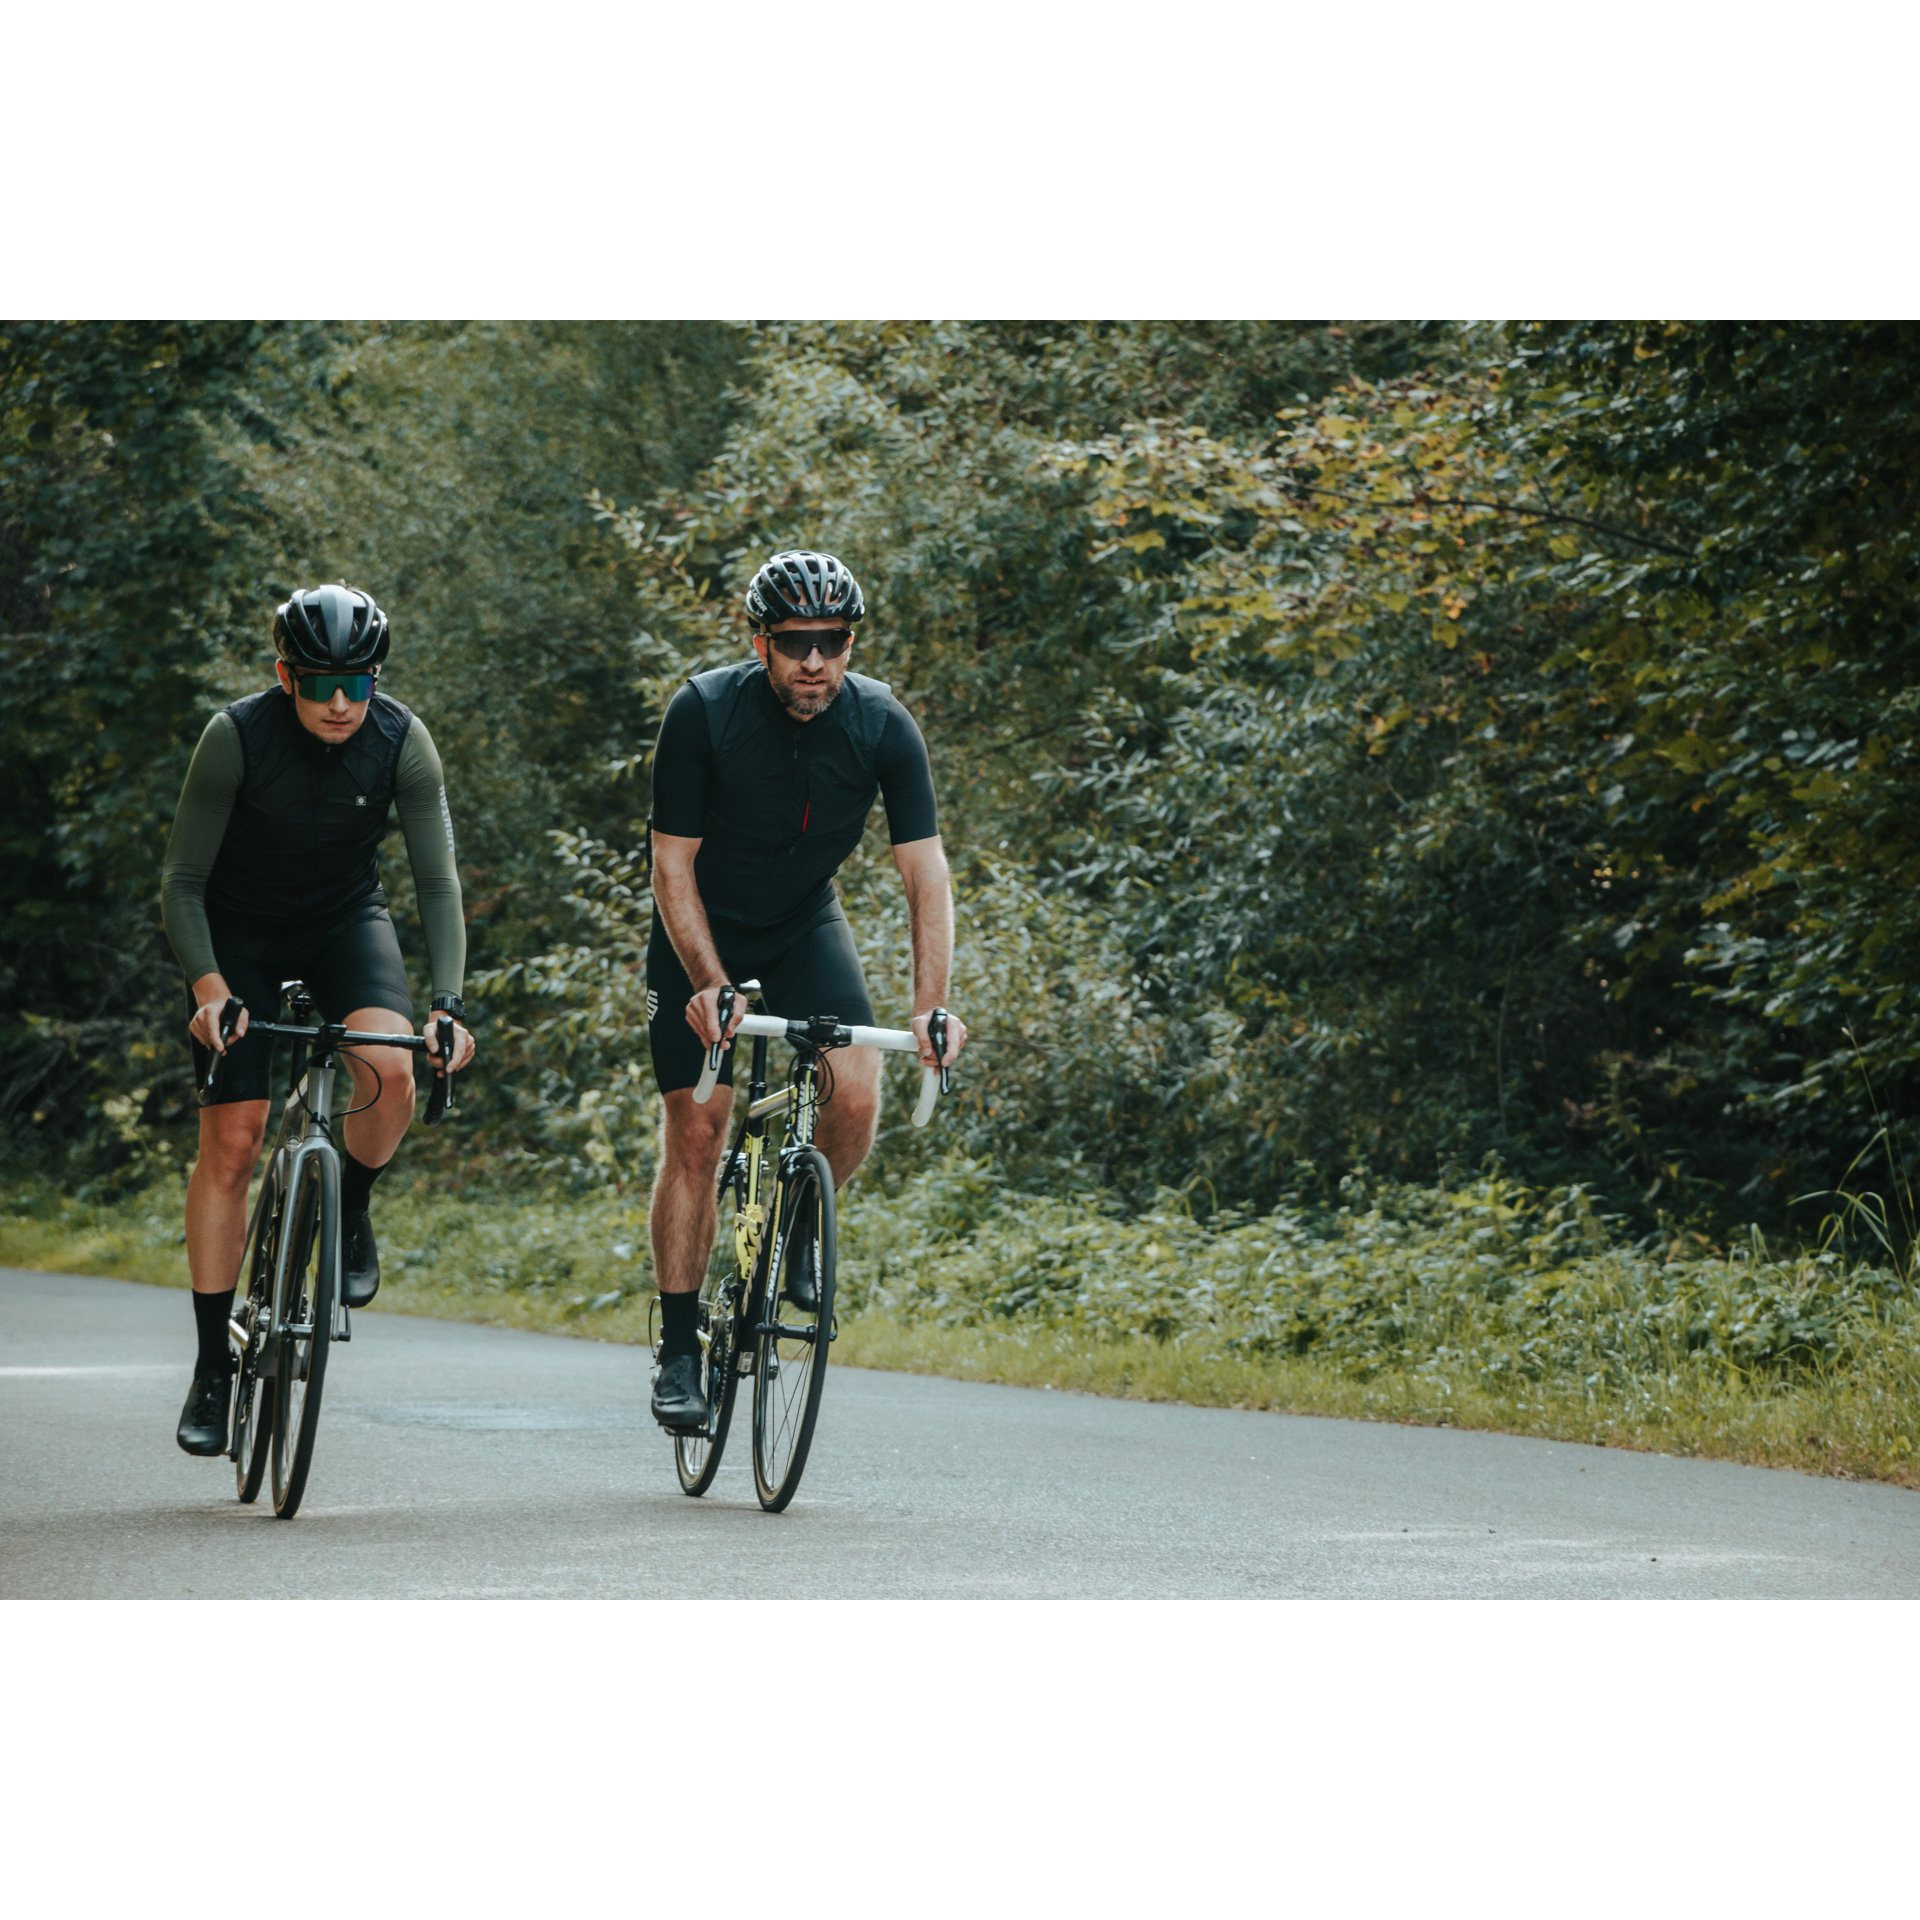 Two cyclists in black cycling clothes, dark glasses and helmets riding bicycles along an asphalt road among green trees and bushes